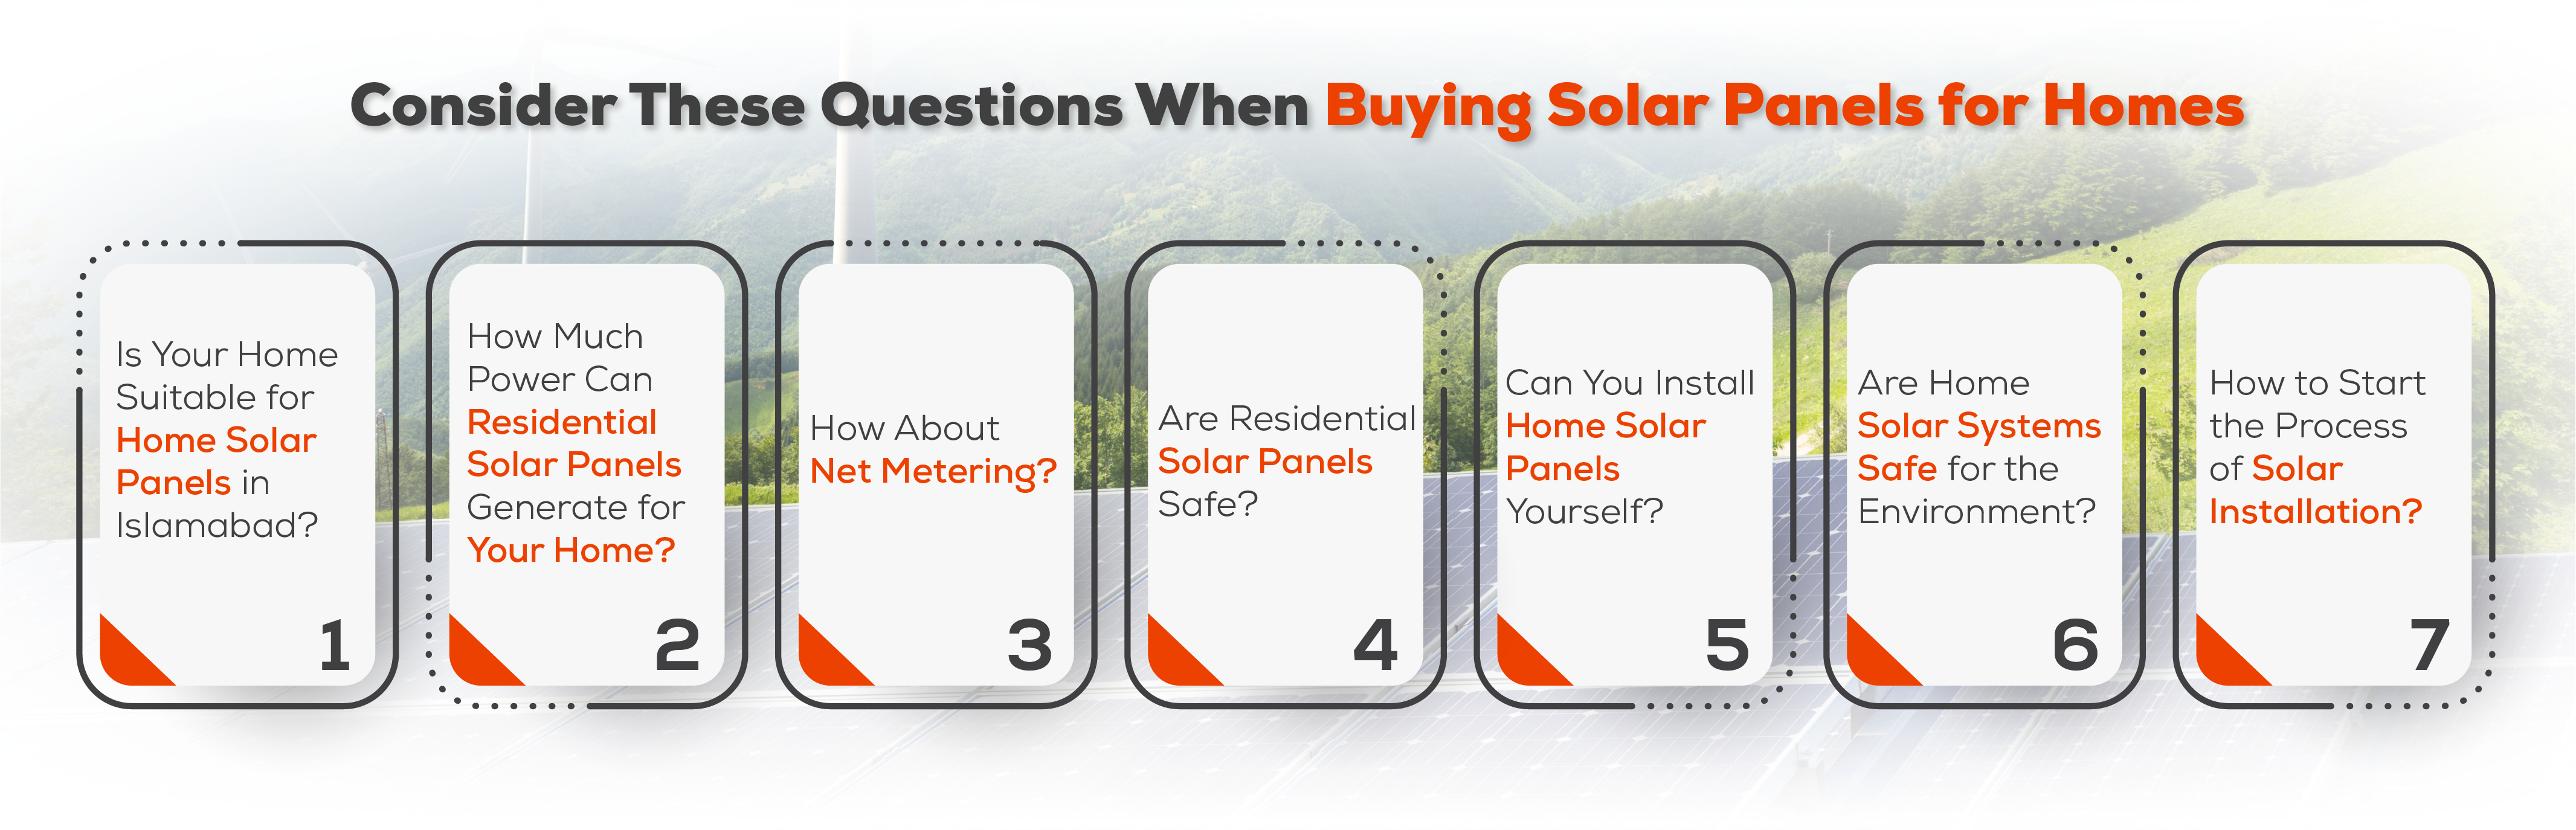 Consider These Questions When Buying Solar Panels for Homes 